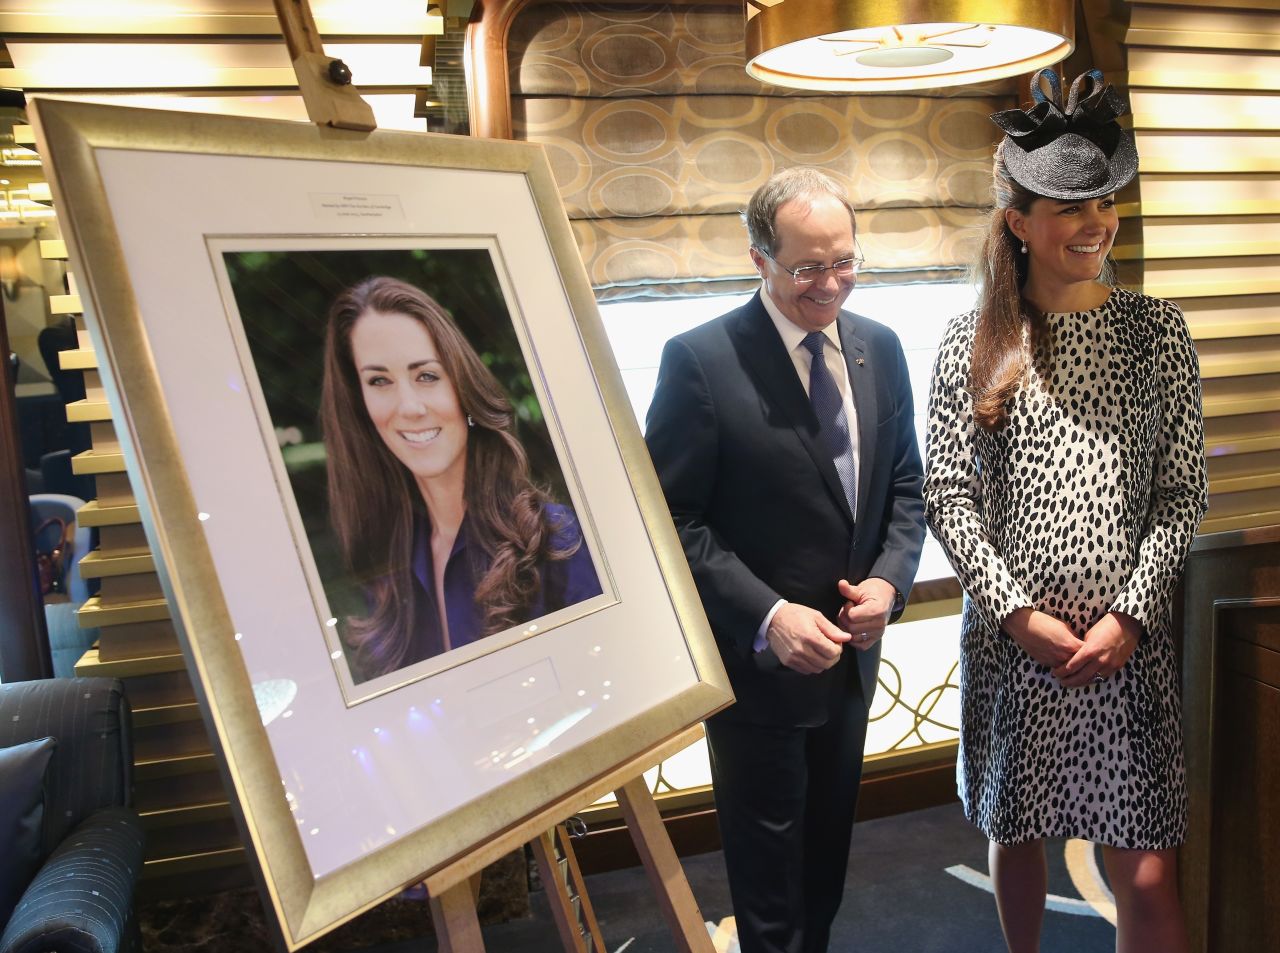 President and CEO of Princess Cruises Alan Buckelew escorts Catherine stands next to an image taken of herself by Getty photographer Chris Jackson after a ship's naming ceremony at Ocean Terminal on June 13, 2013 in Southampton. This was Catherine's final public appearance before she gives birth.